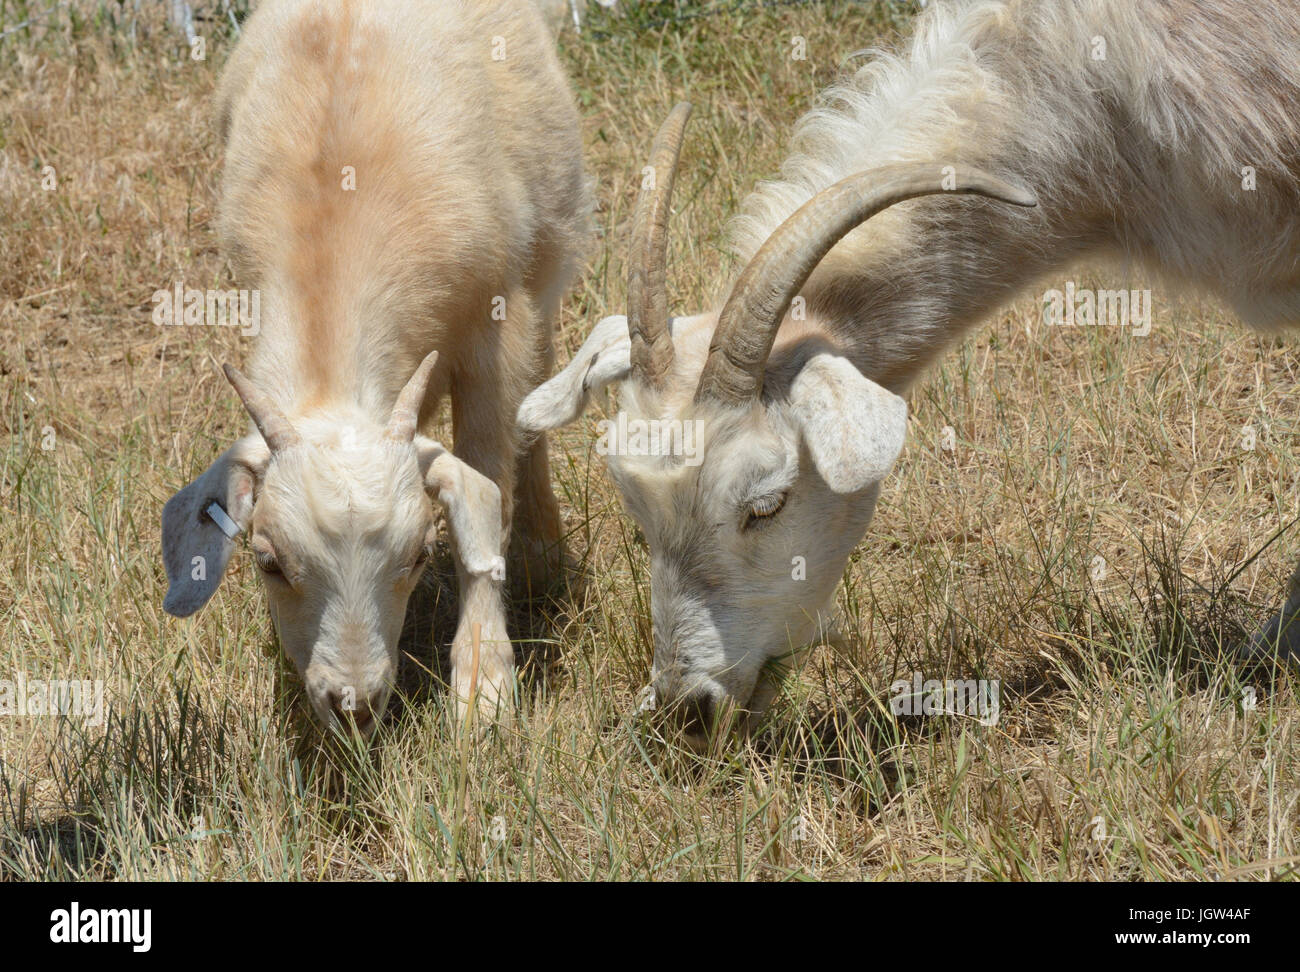 Mother and baby kid kiko goats grazing together side by side as part of weed control and wildfire abatement program Stock Photo